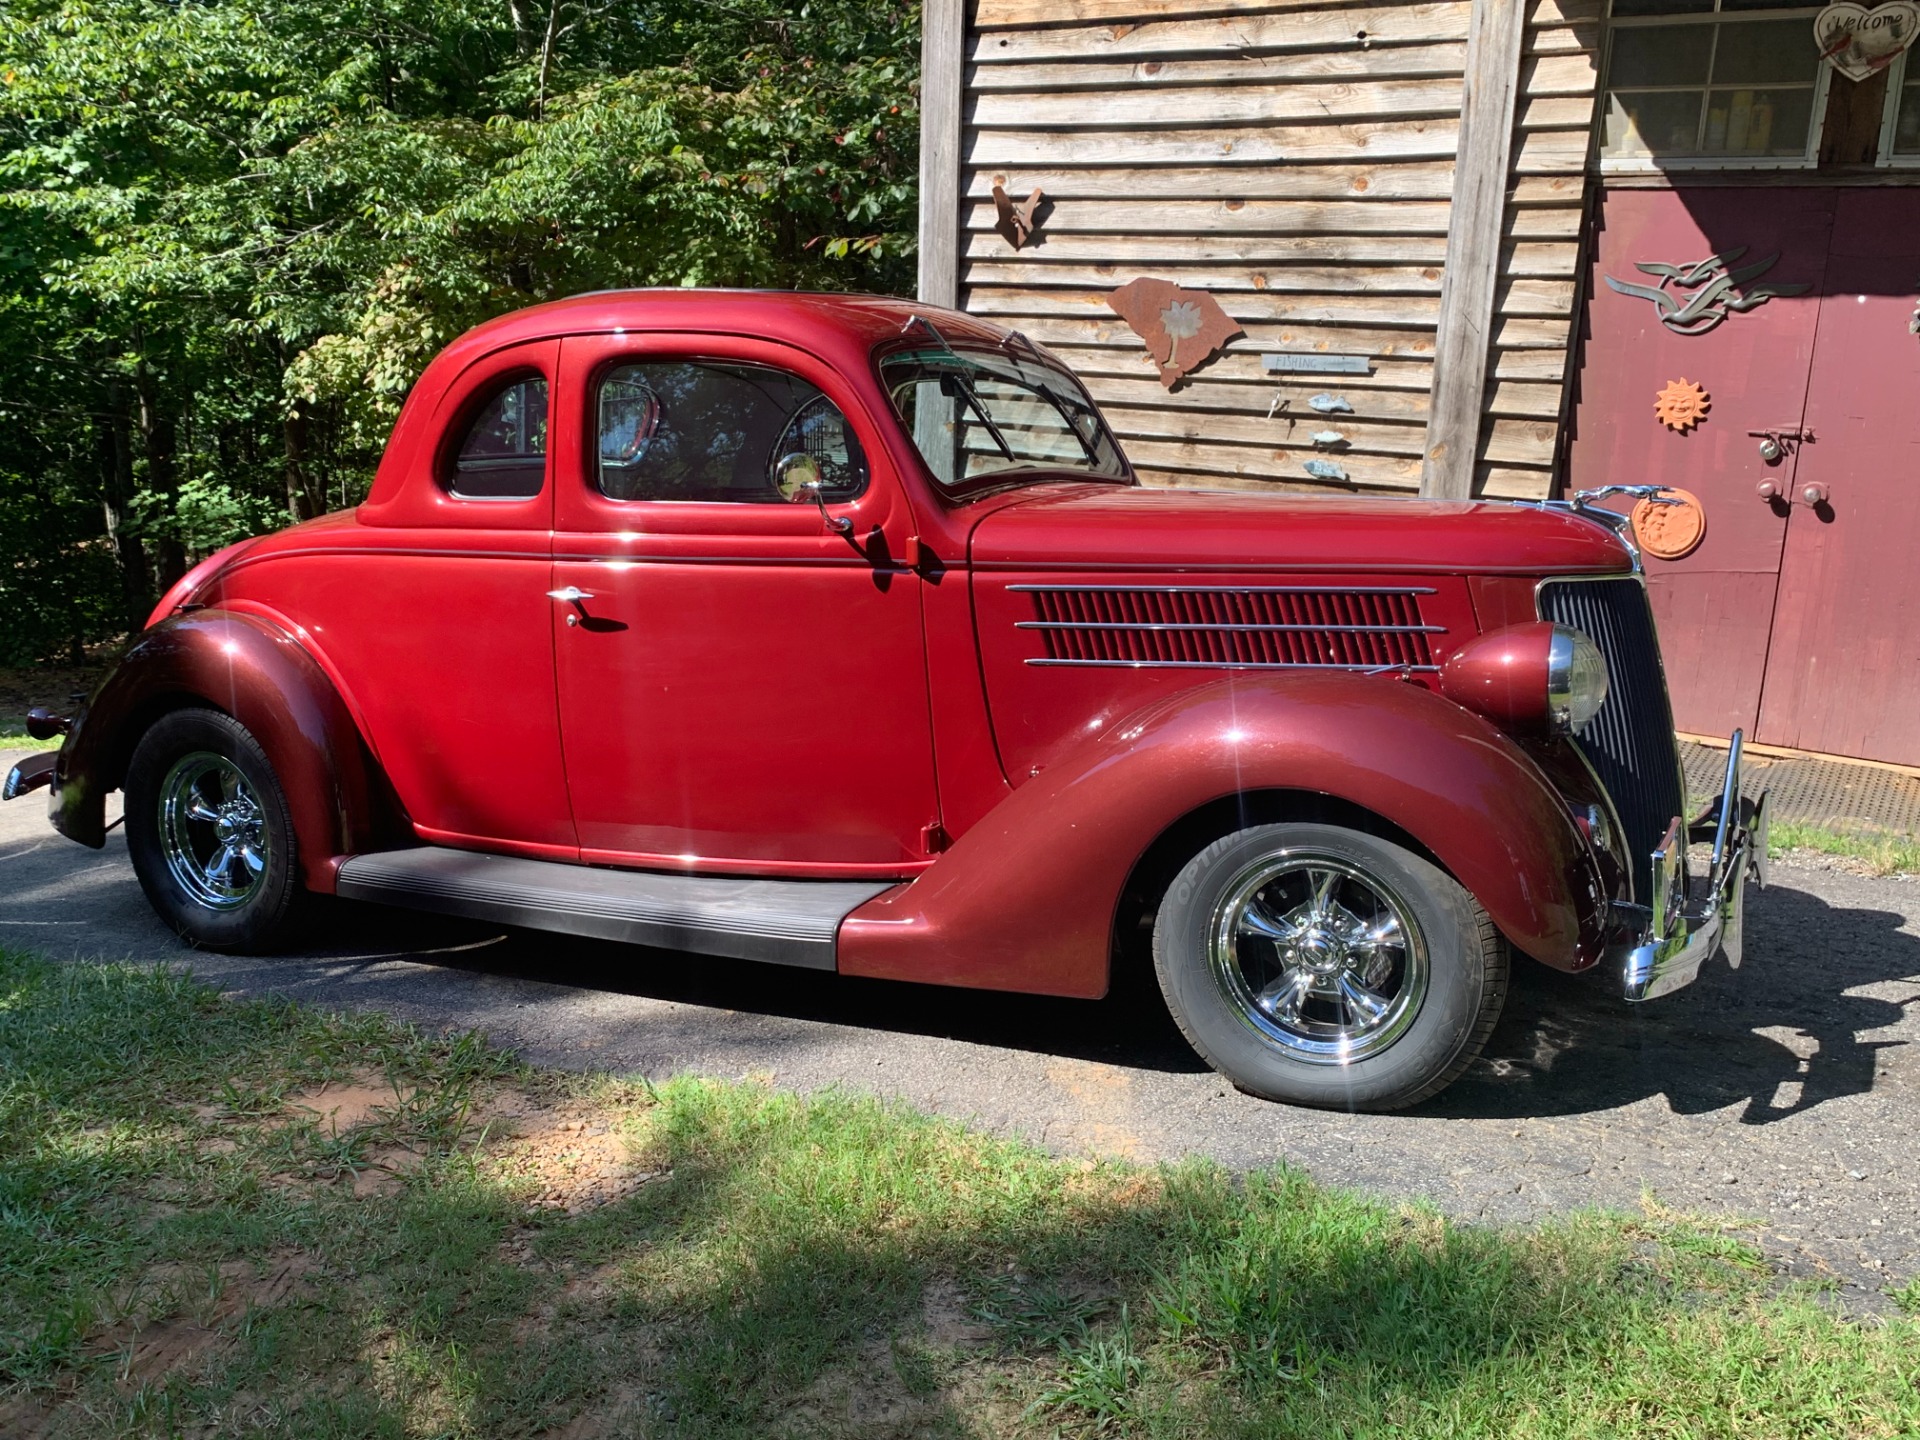 Used 1936 Ford 5 Window Rumble Seat Coupe